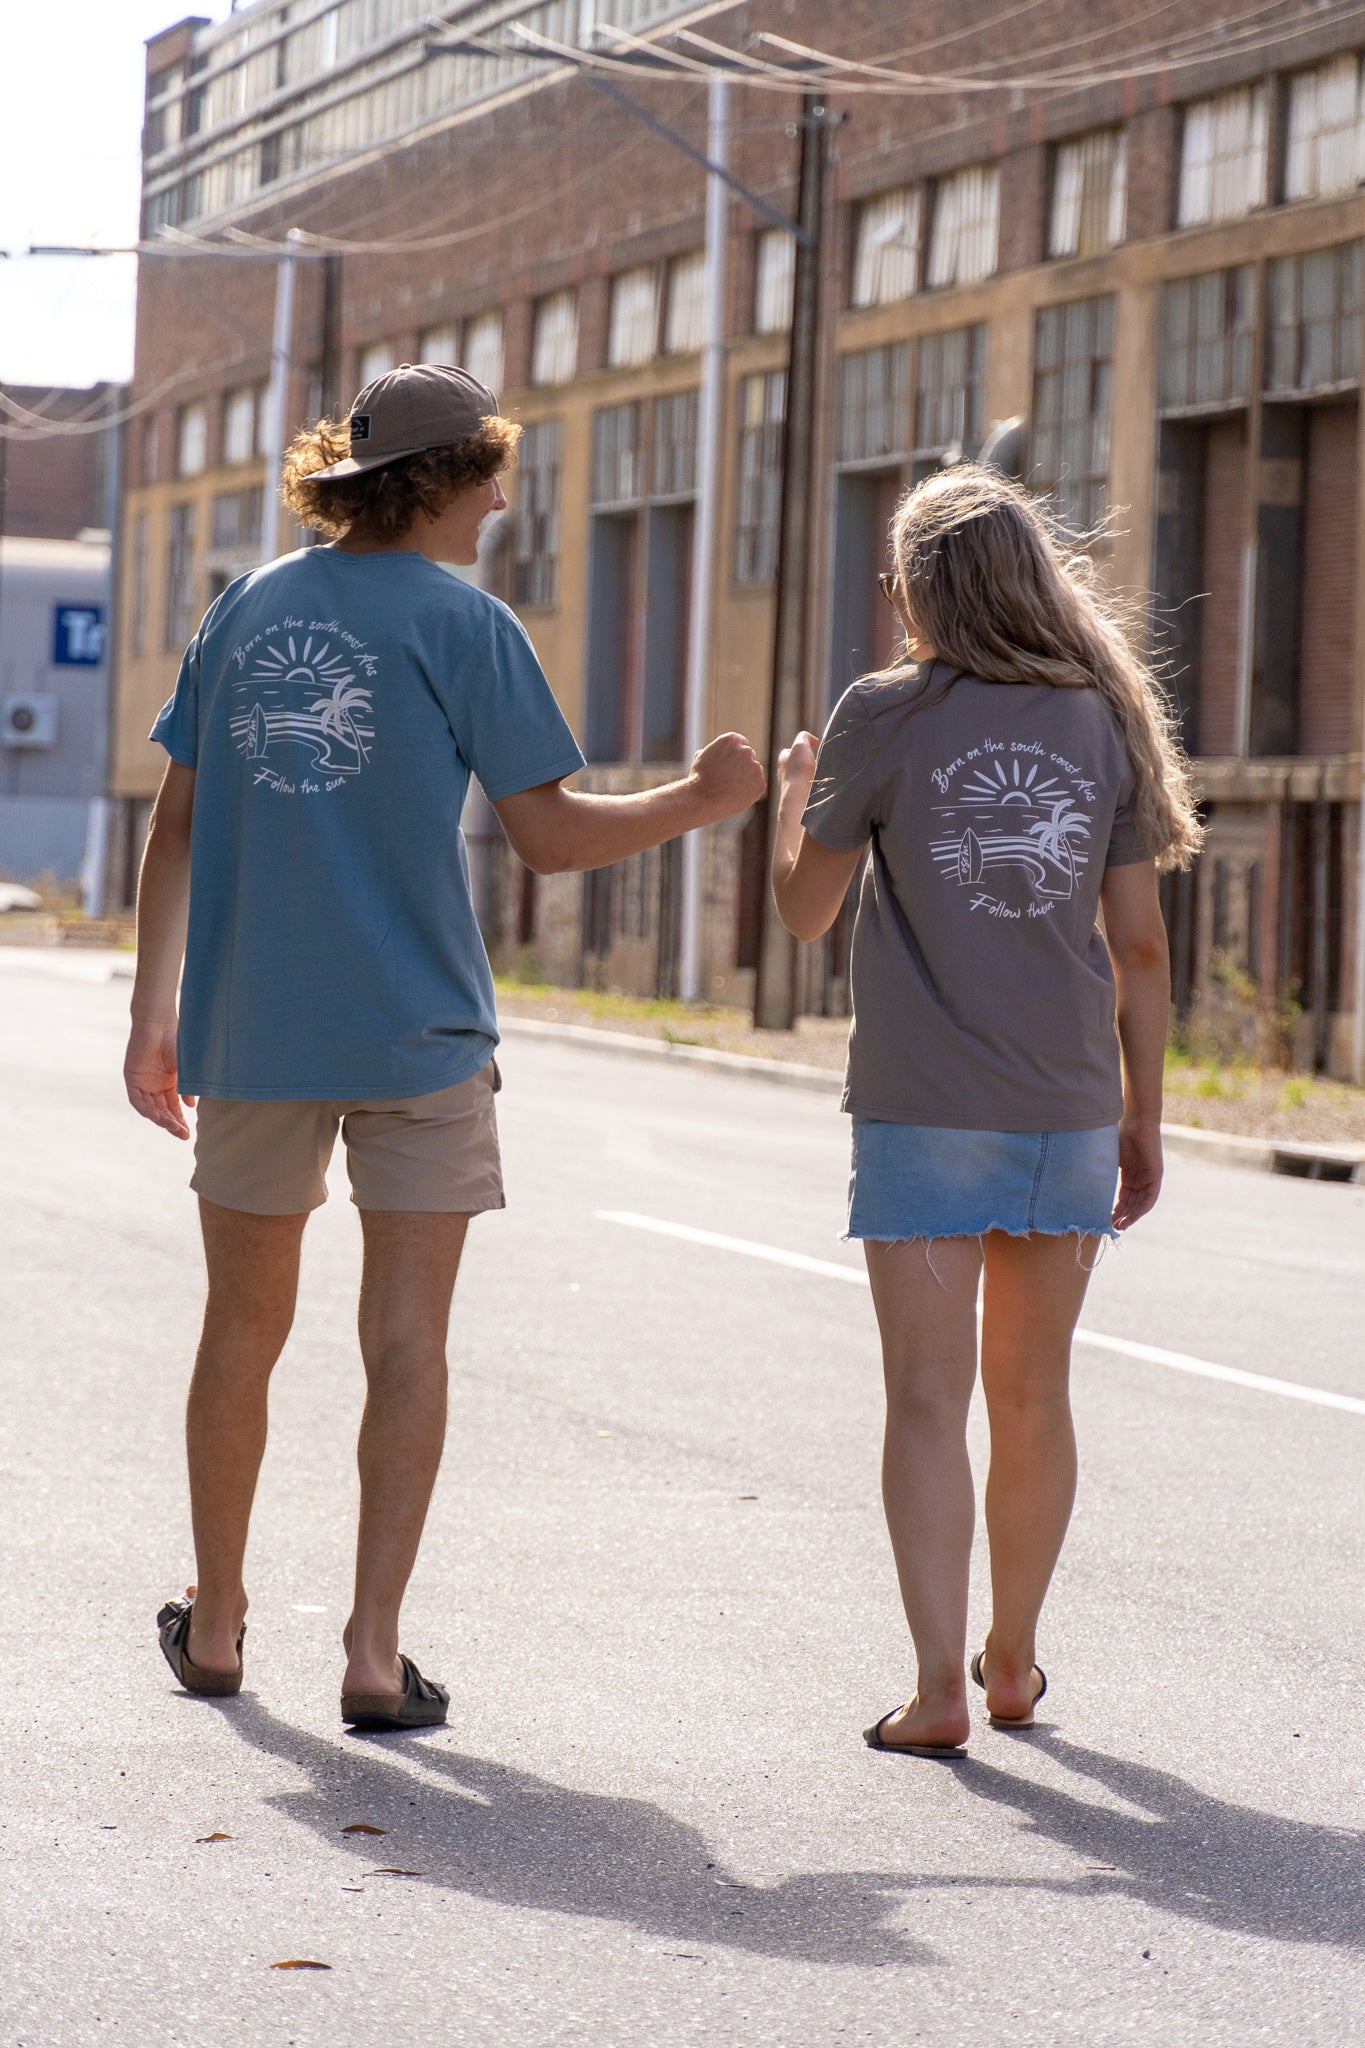 OSOM south coast tee. tees in blue and dust colours. beach design on back of shirt. friends walking together. ethically made clothing.